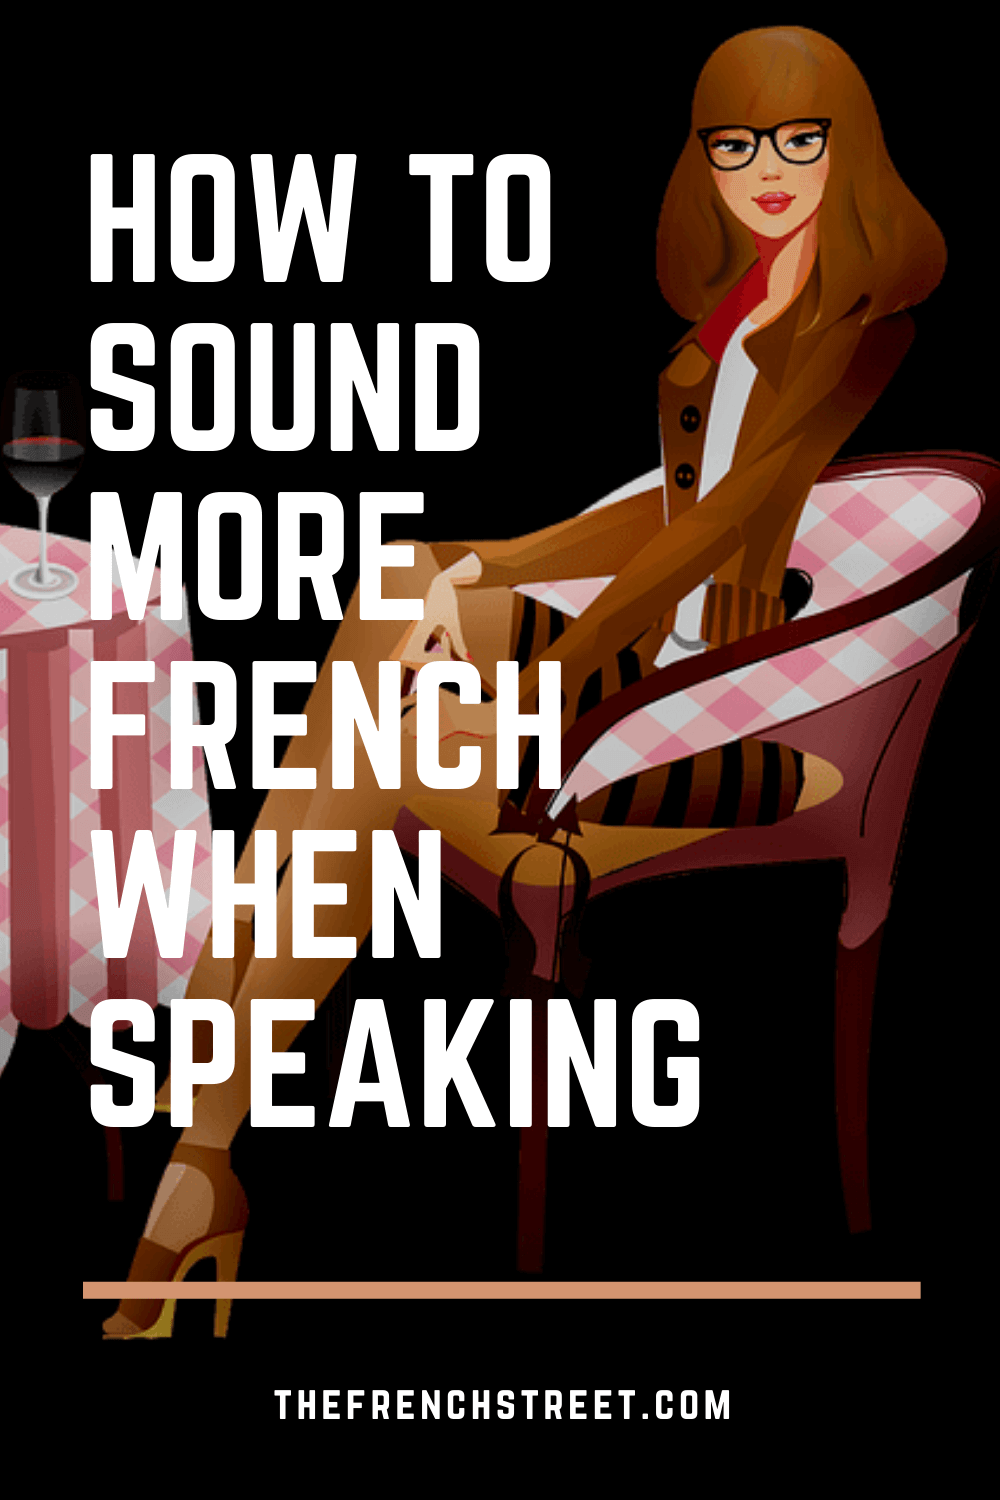 How to Sound More French When Speaking.